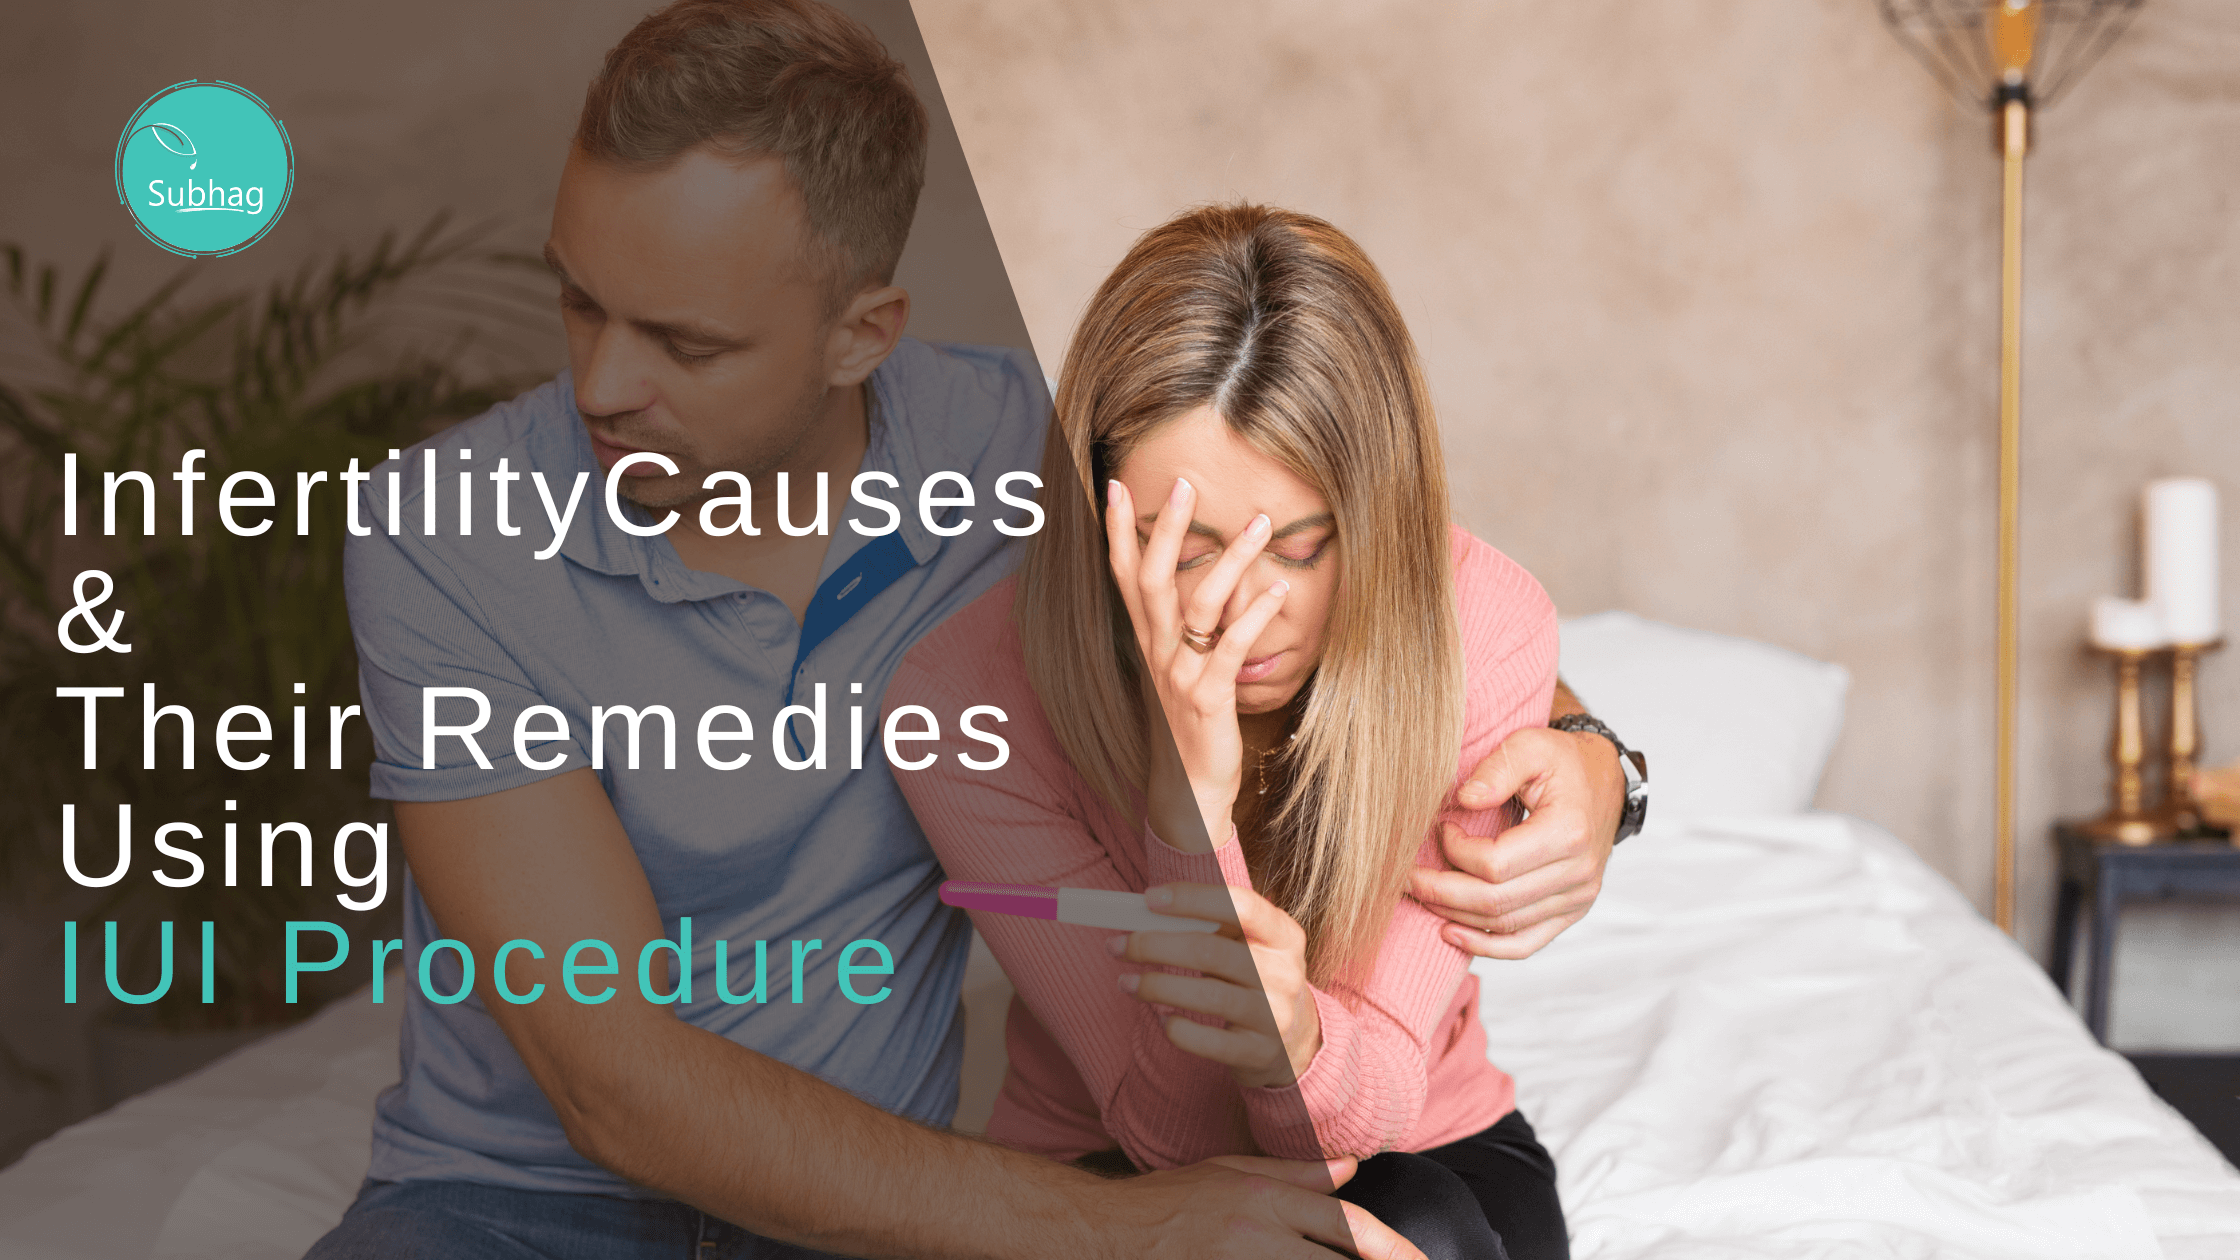 Infertility Causes & Their Remedies Using IUI Procedure